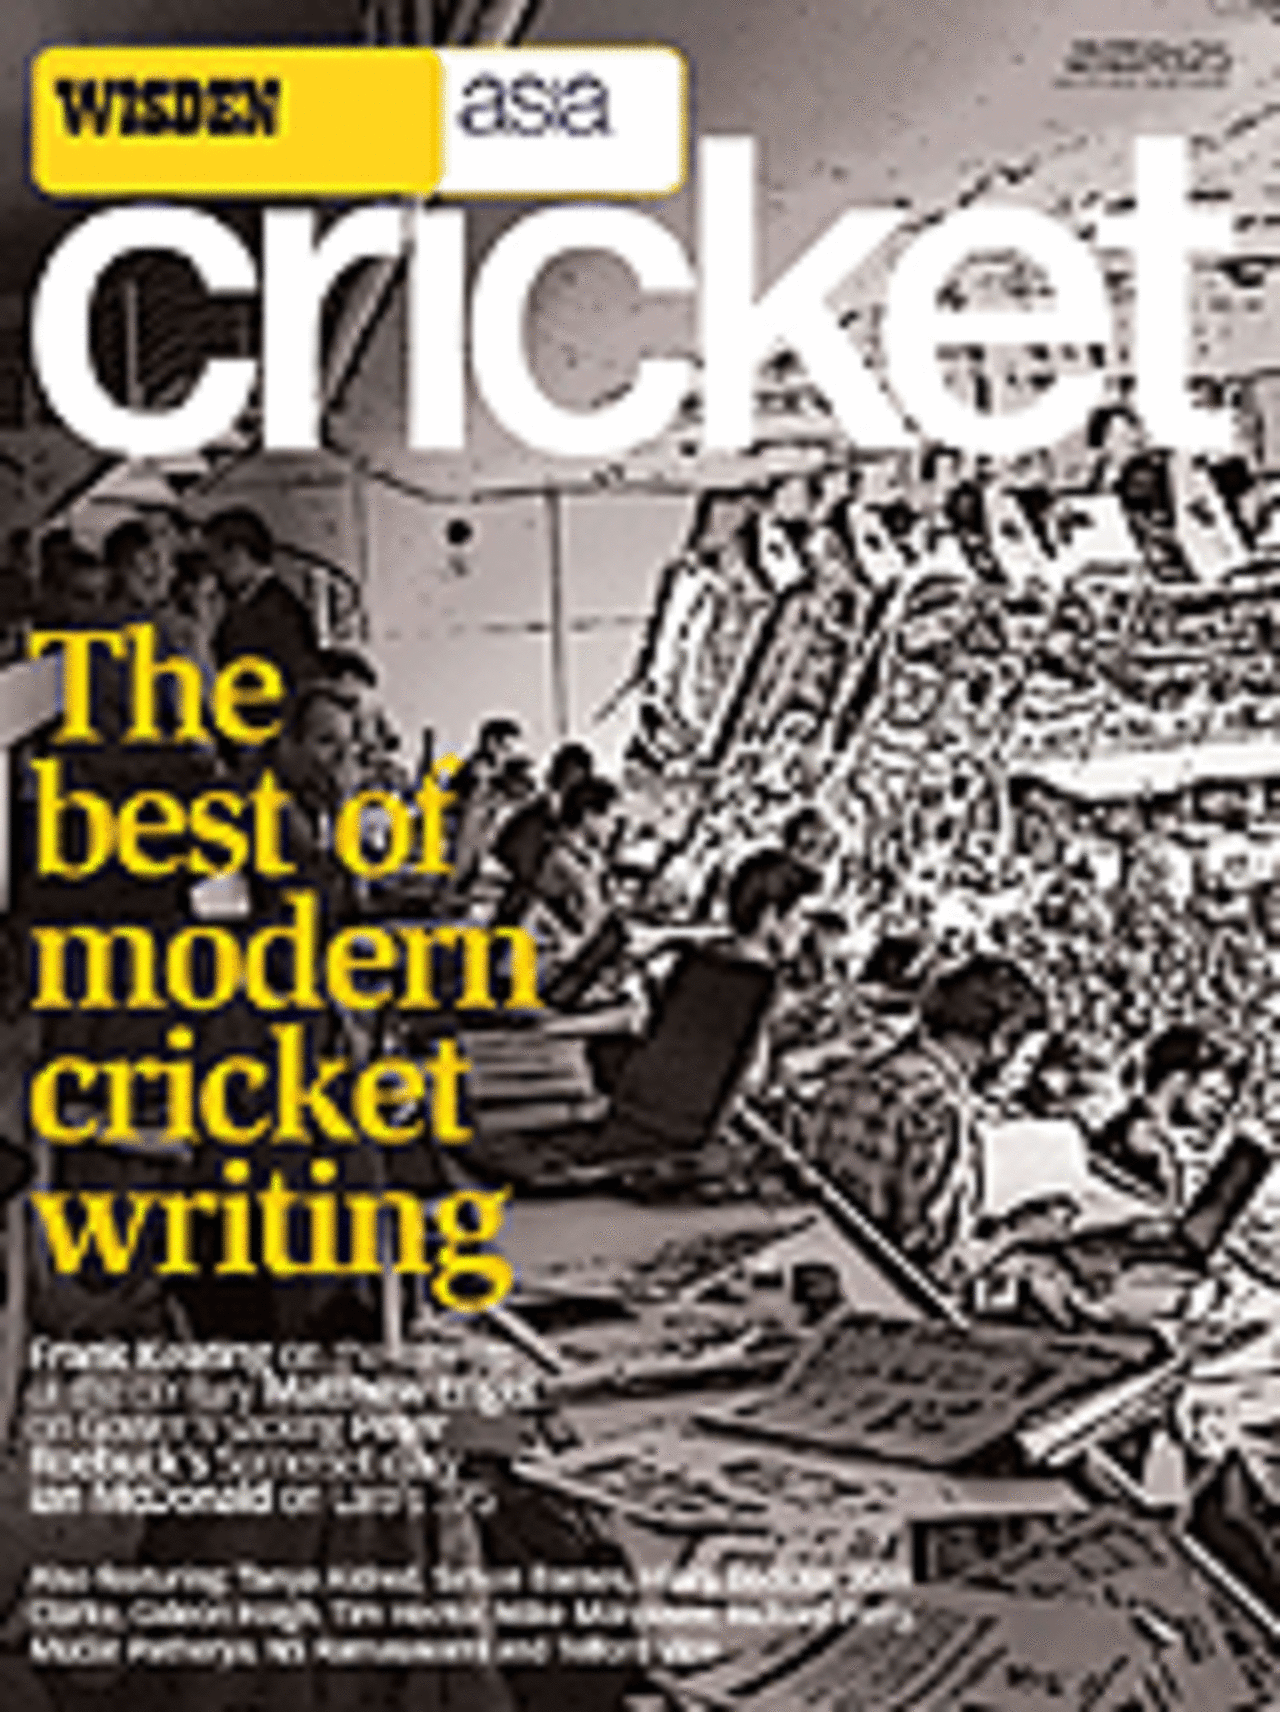 Wisden Asia Cricket cover, July 2004